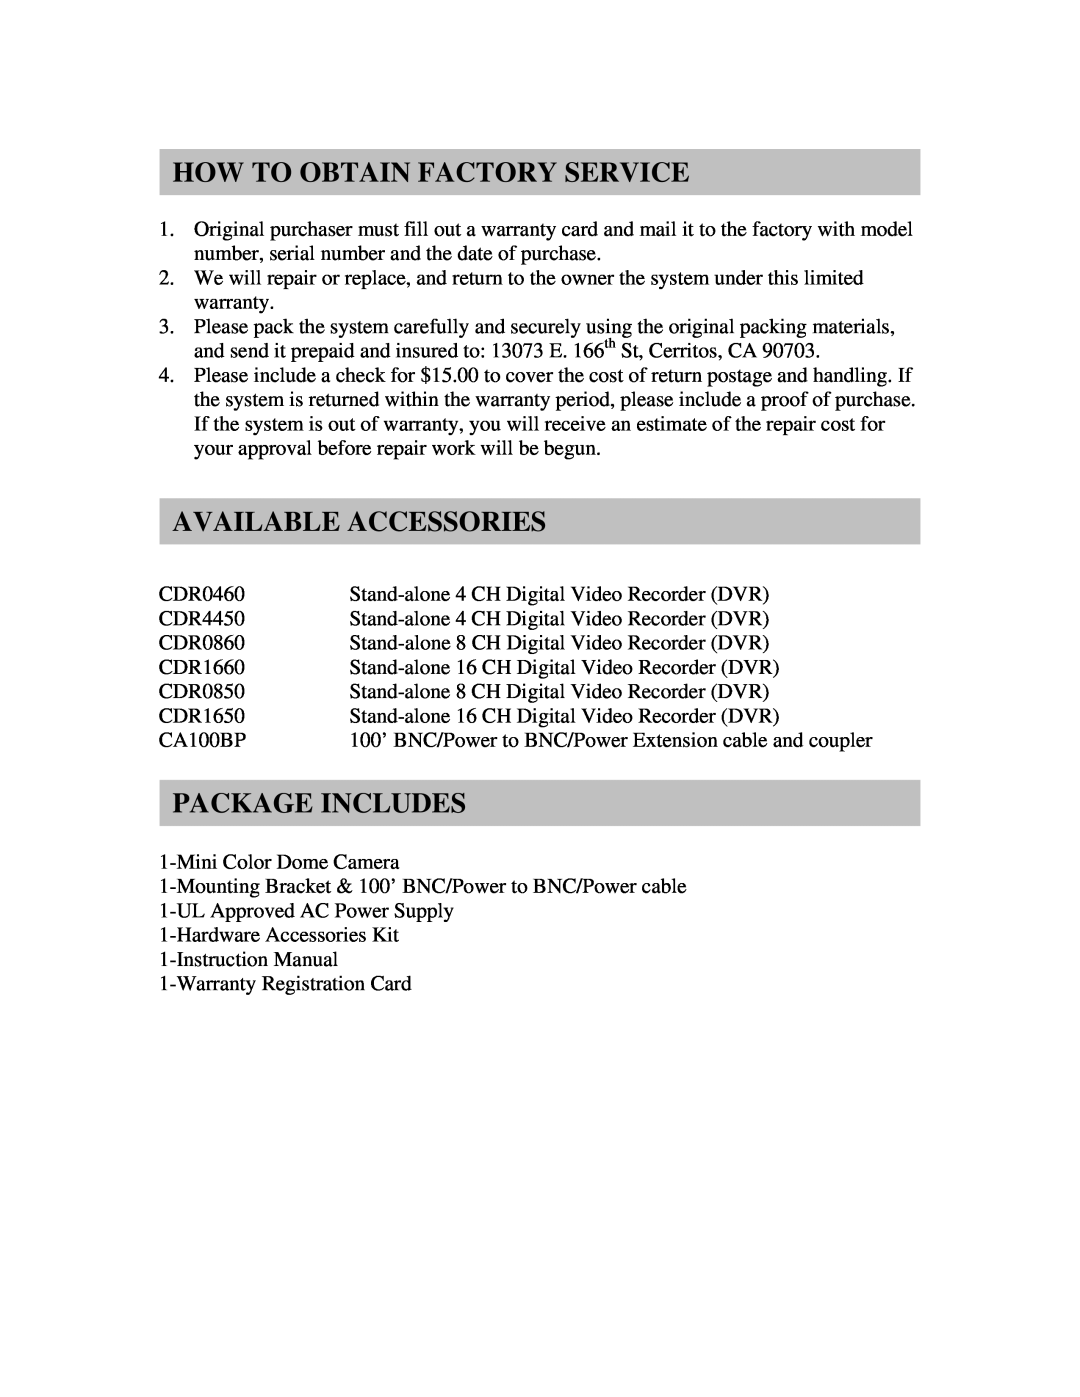 Clover Electronics HDC365 instruction manual How To Obtain Factory Service, Available Accessories, Package Includes 